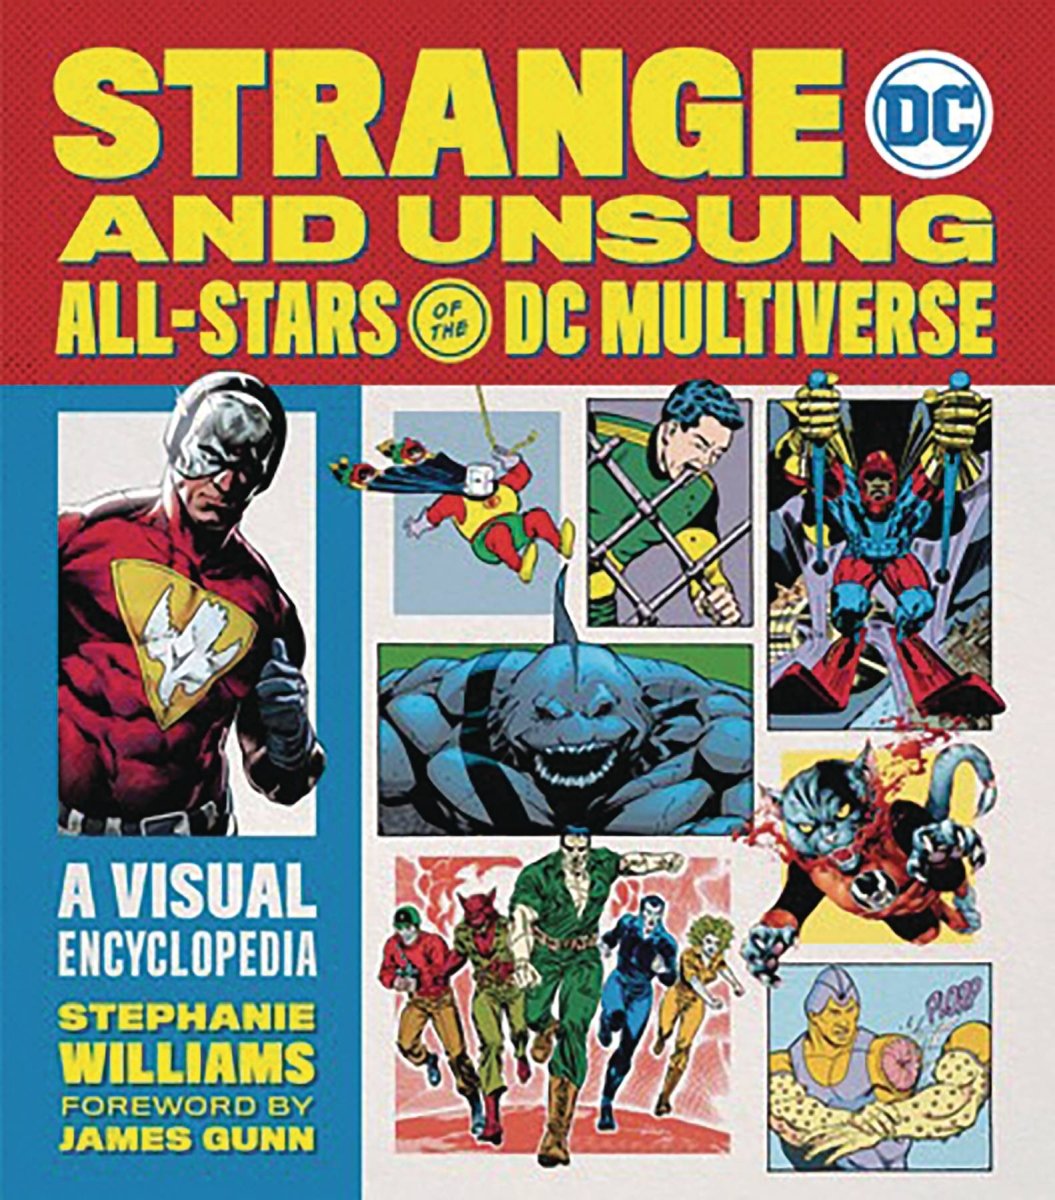 Strange And Unsung All-Stars Of The DC Multiverse: A Visual Encyclopedia - Walt's Comic Shop